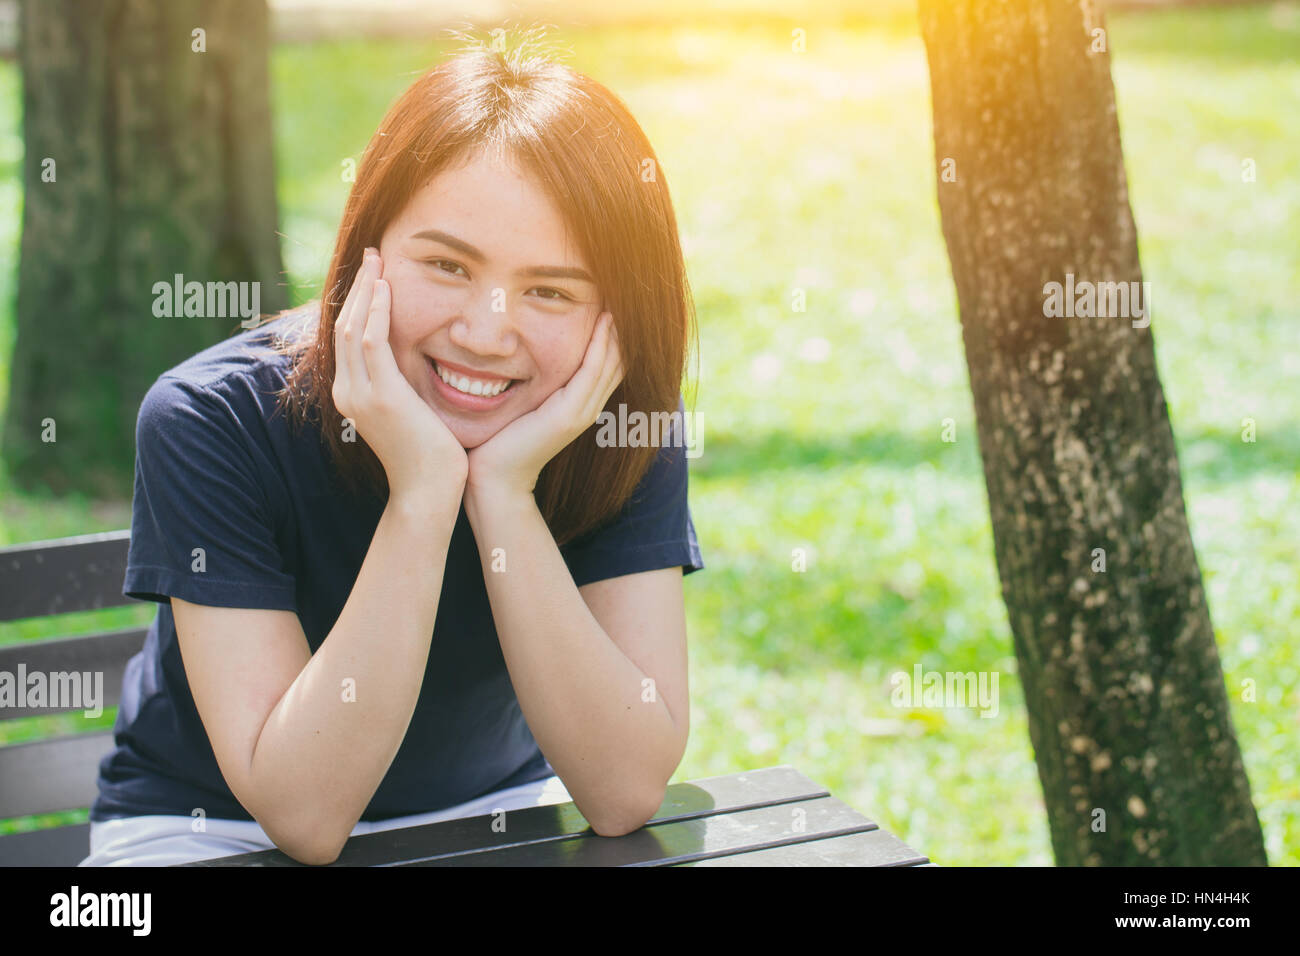 Single asian women teen cute short hair friendly smiley in the green park relax and smile. Stock Photo